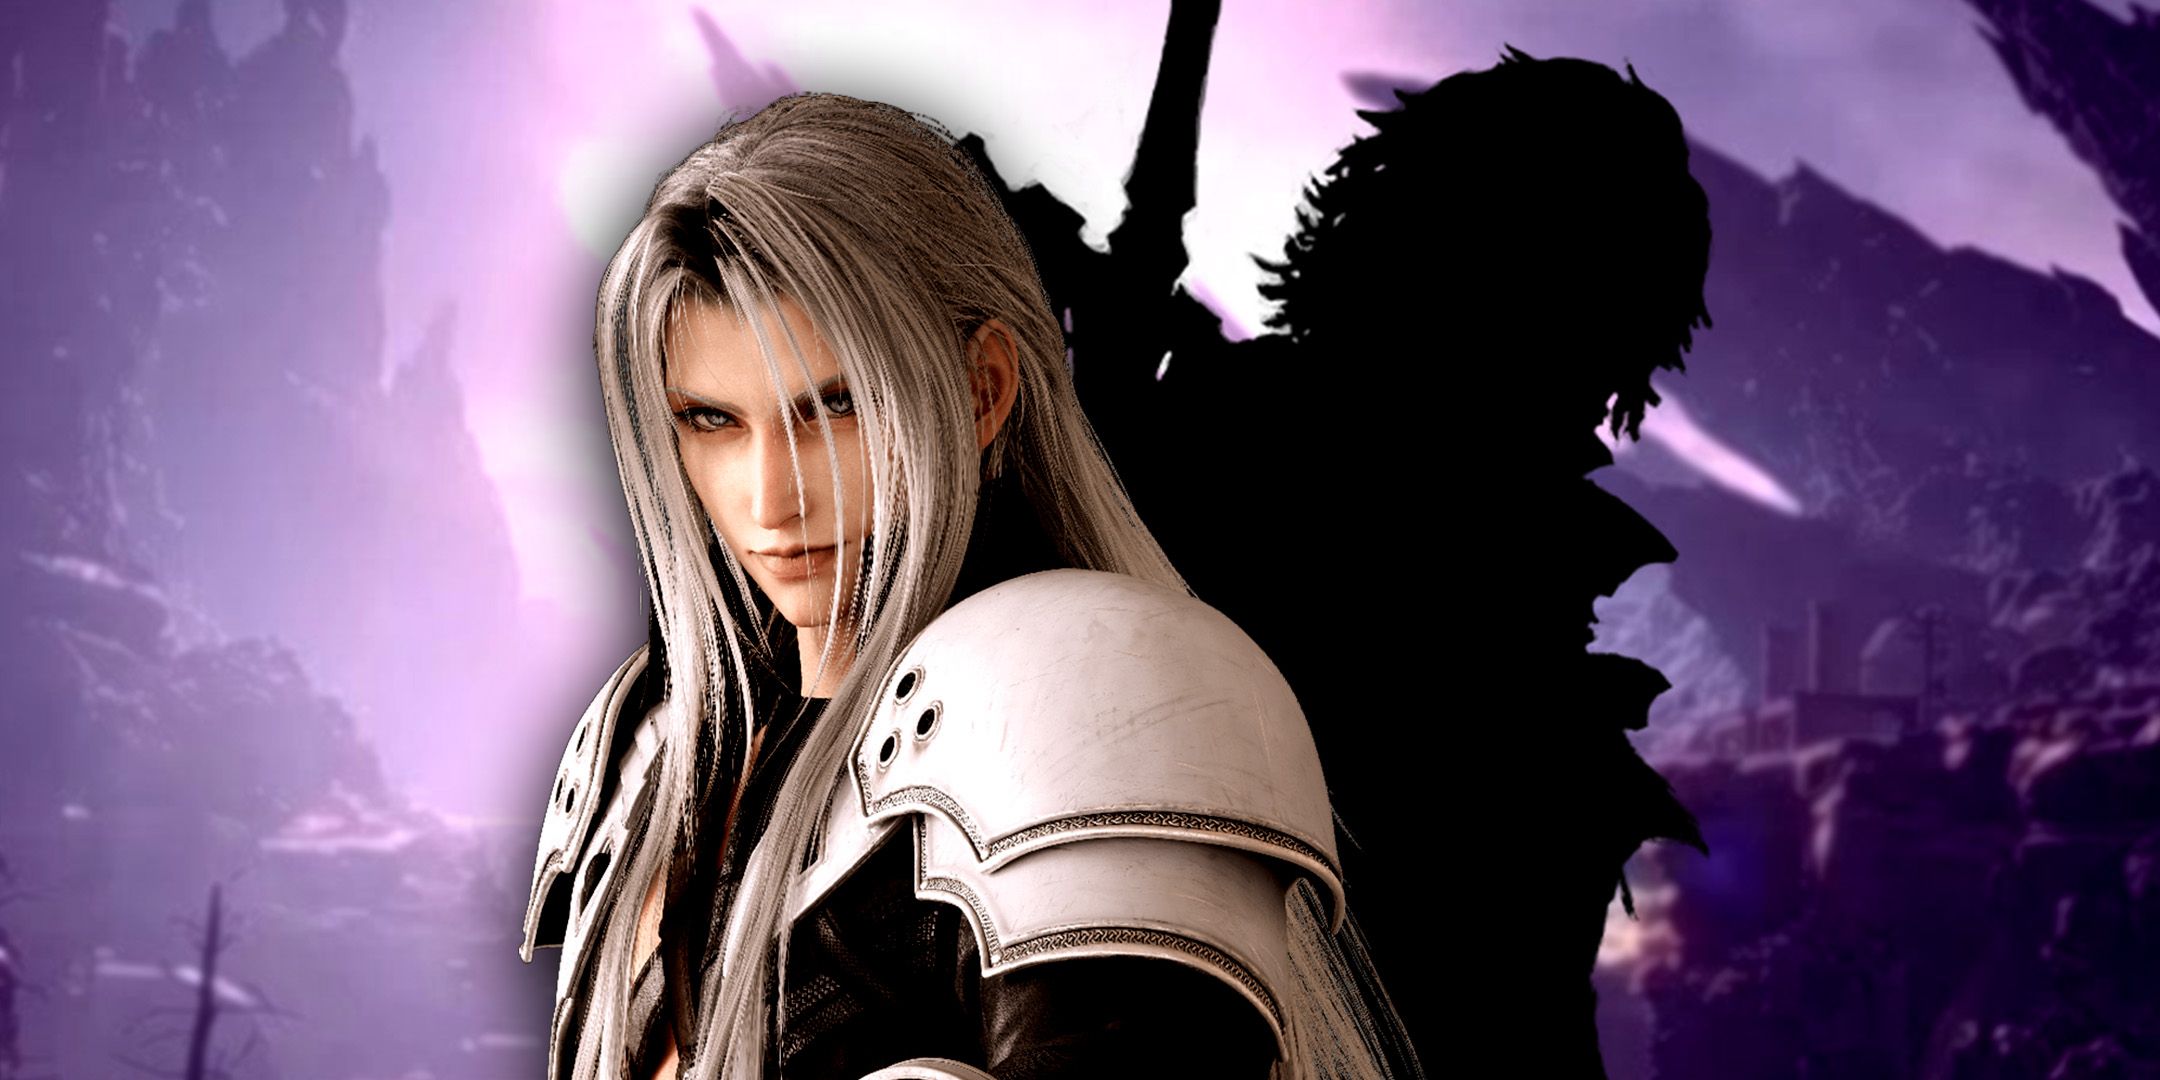 Sephiroth from Final Fantasy 7 Rebirth standing next to final fantasy protagonist silhouette